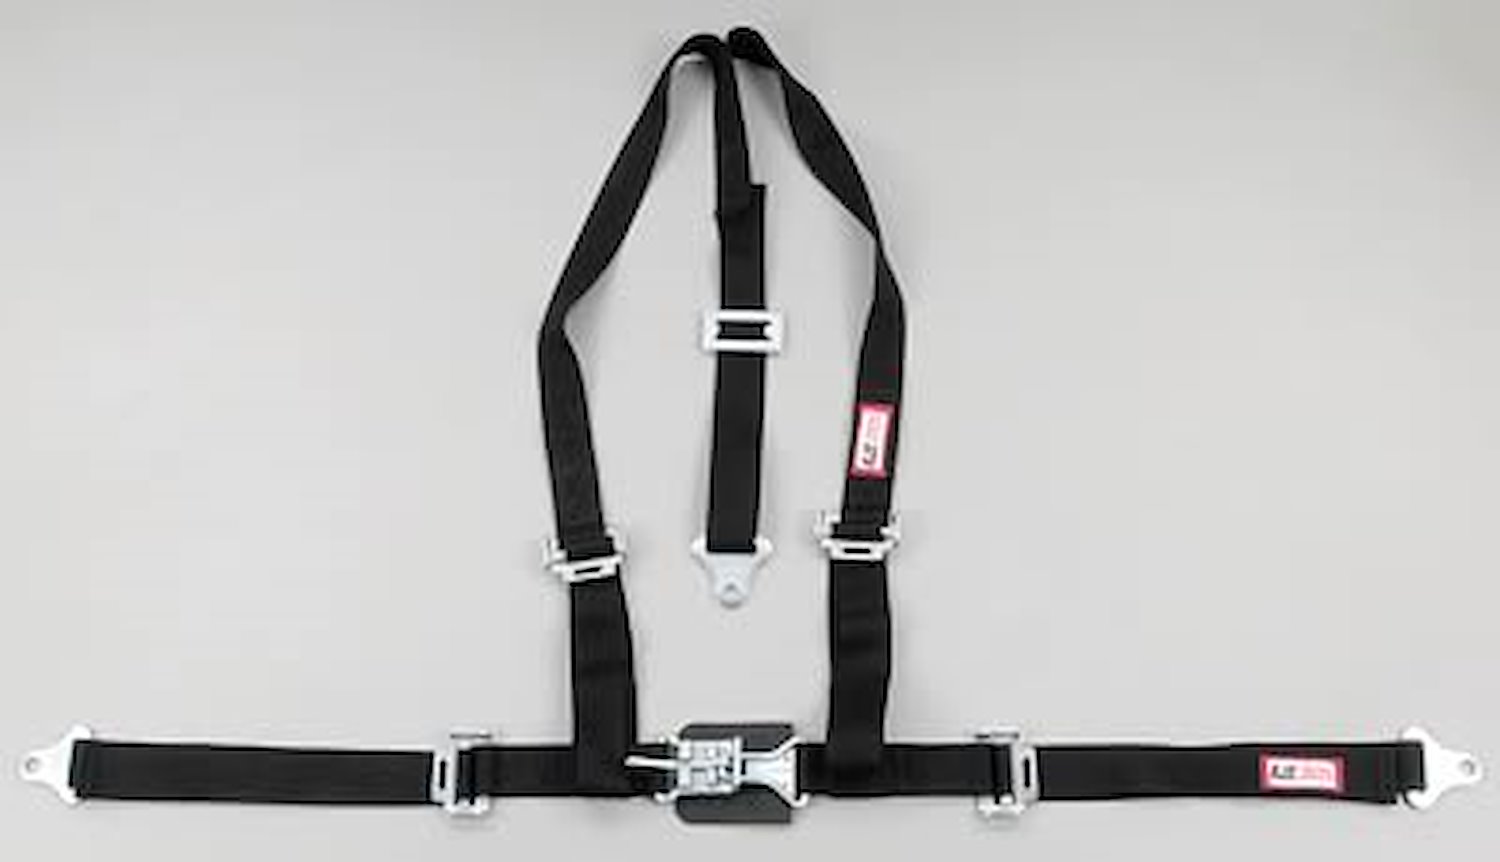 NON-SFI L&L HARNESS 3 PULL DOWN Lap Belt w/adjuster SNAP 2 S.H. Individual ROLL BAR Mount WRAP/SNAP GRAY